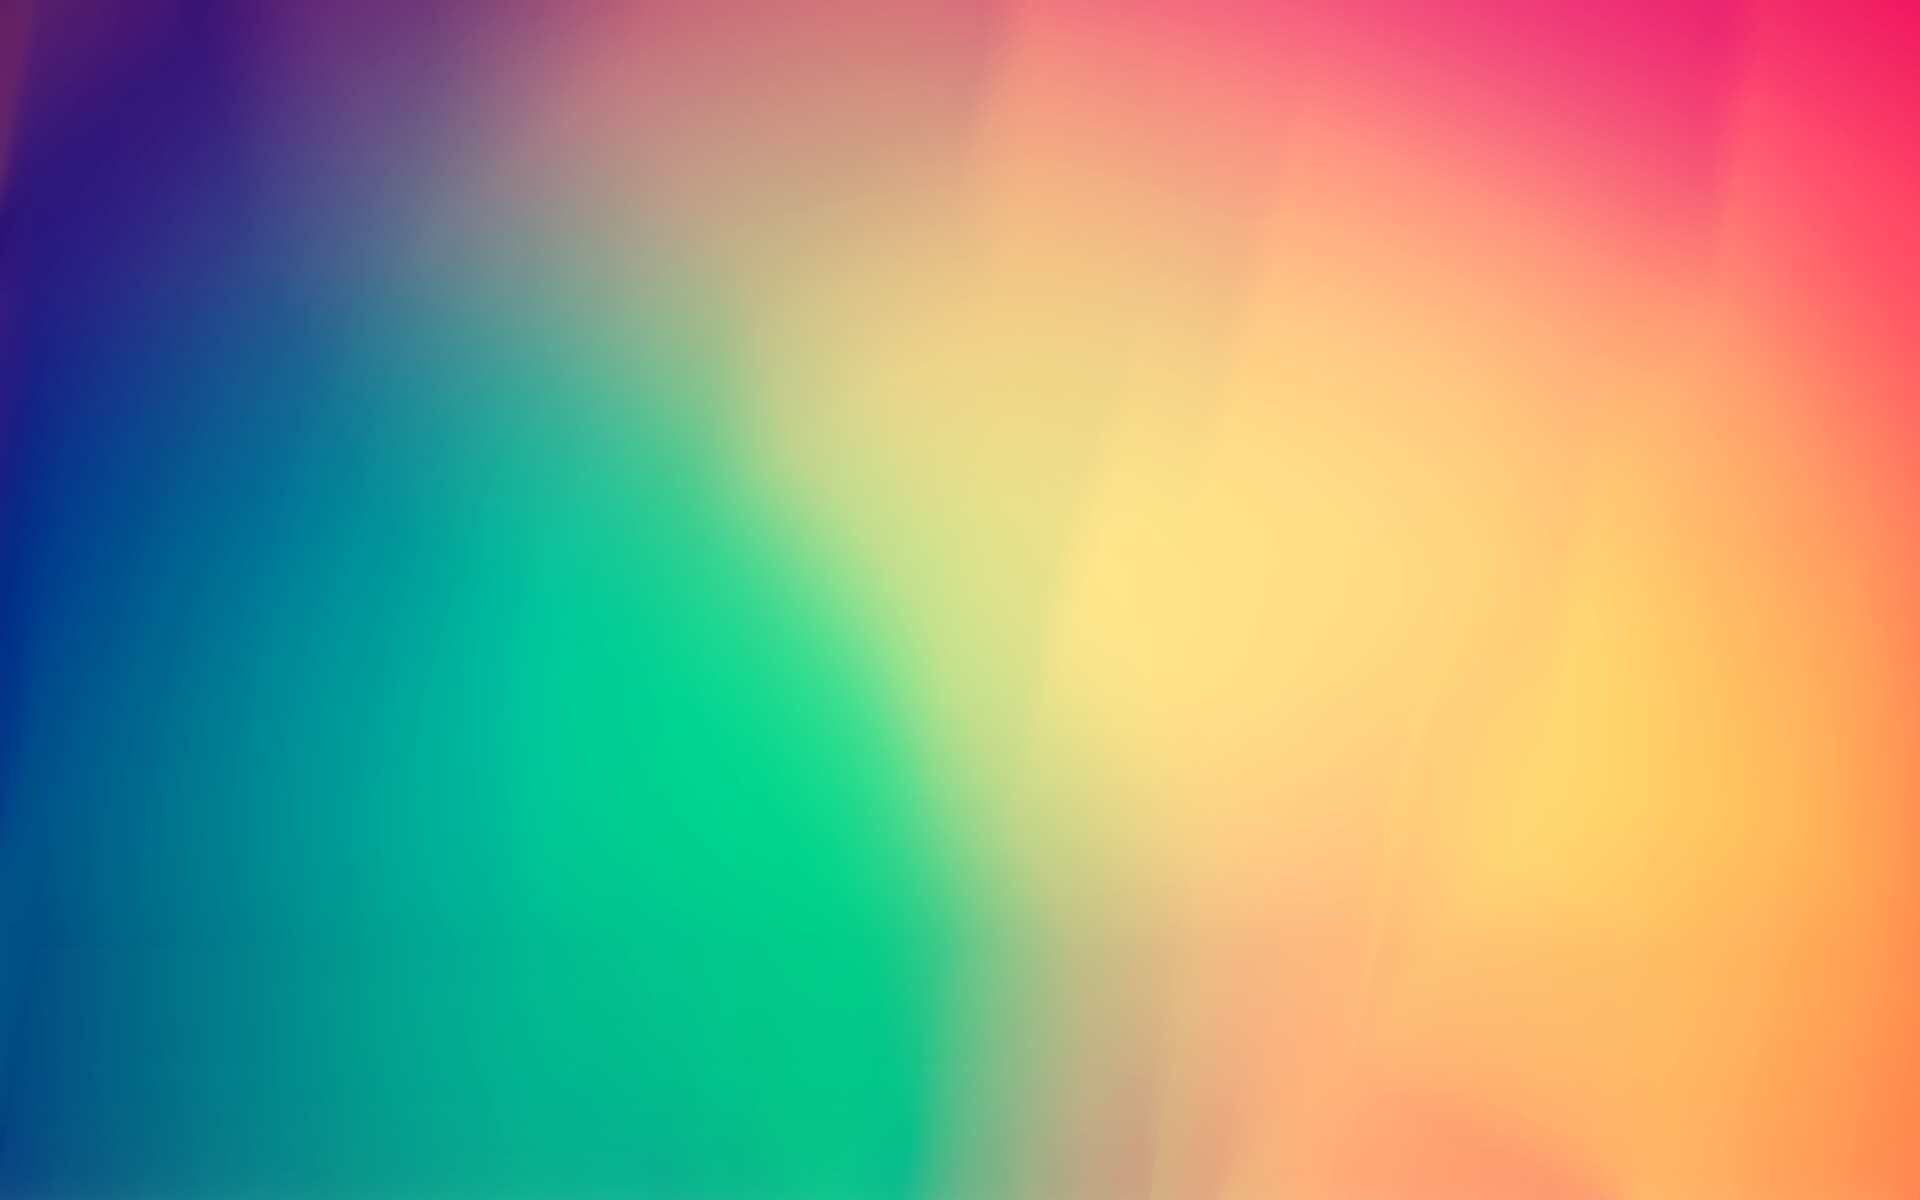 Gradient blur Wallpaper. HD cool wallpaper, Solid color background, Colorful background